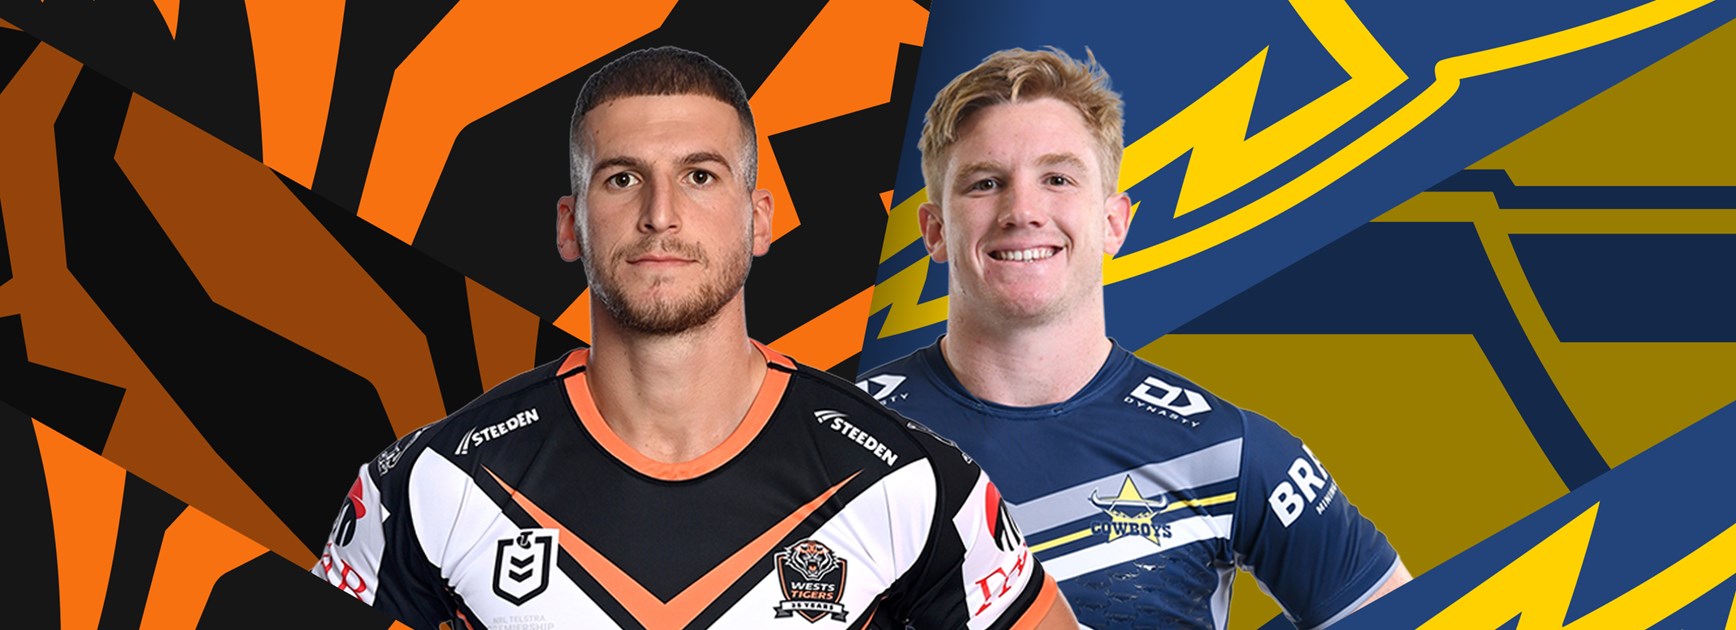 Wests Tigers v Cowboys: Doueihi rested and ready; Taumalolo blow